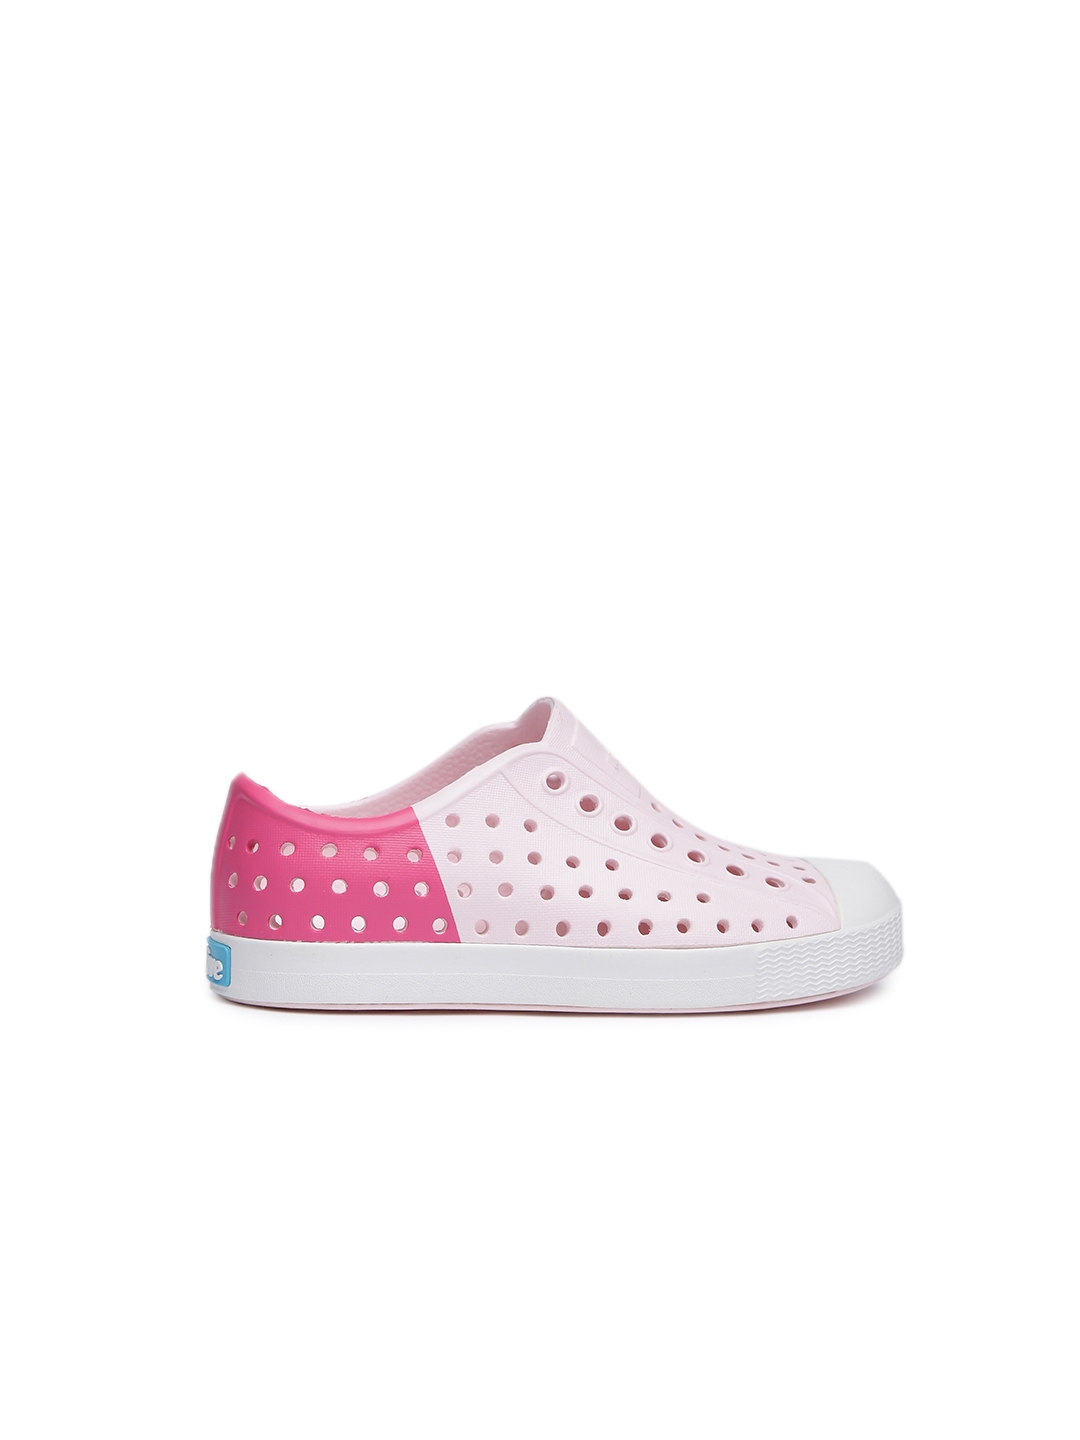 43 Casual Buy native shoes nyc for Girls